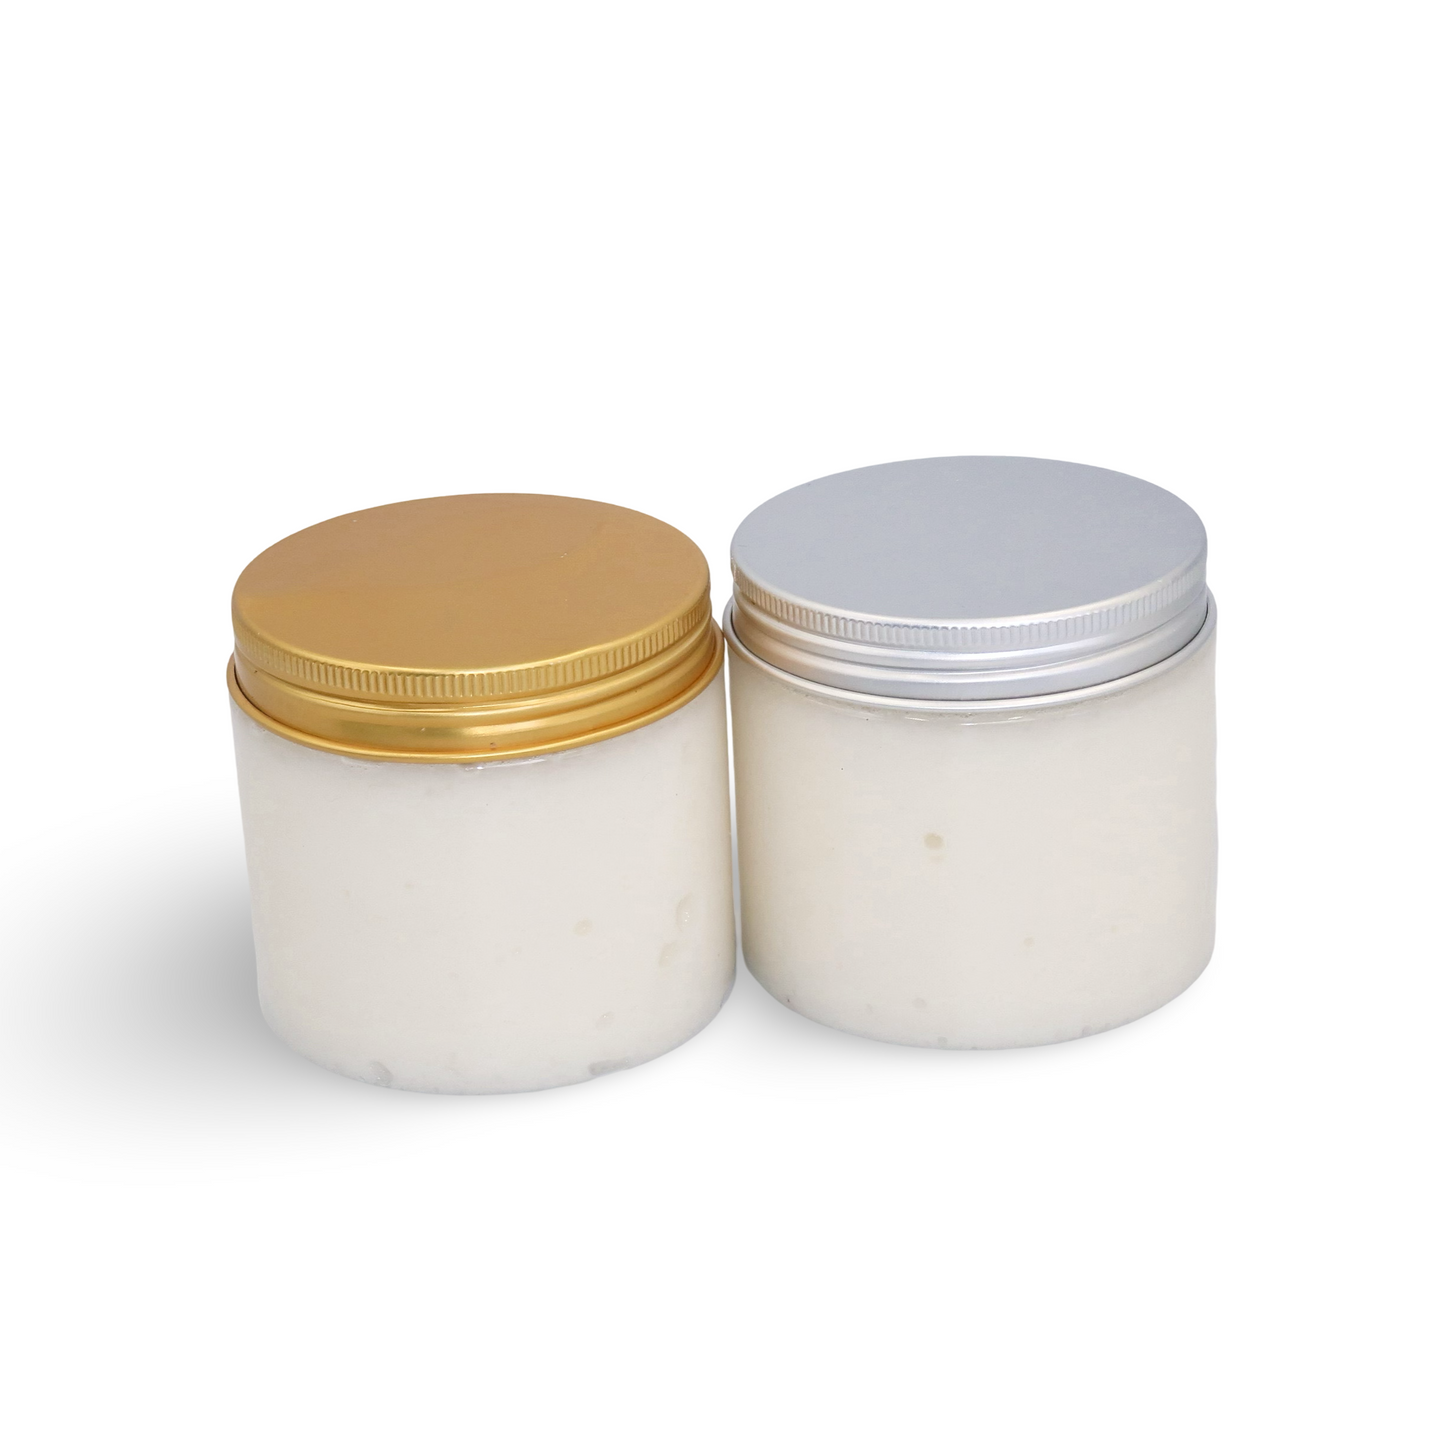 Radiance anti aging whipped shea body butter enriched with hyaluronic acid, collagen & retinol